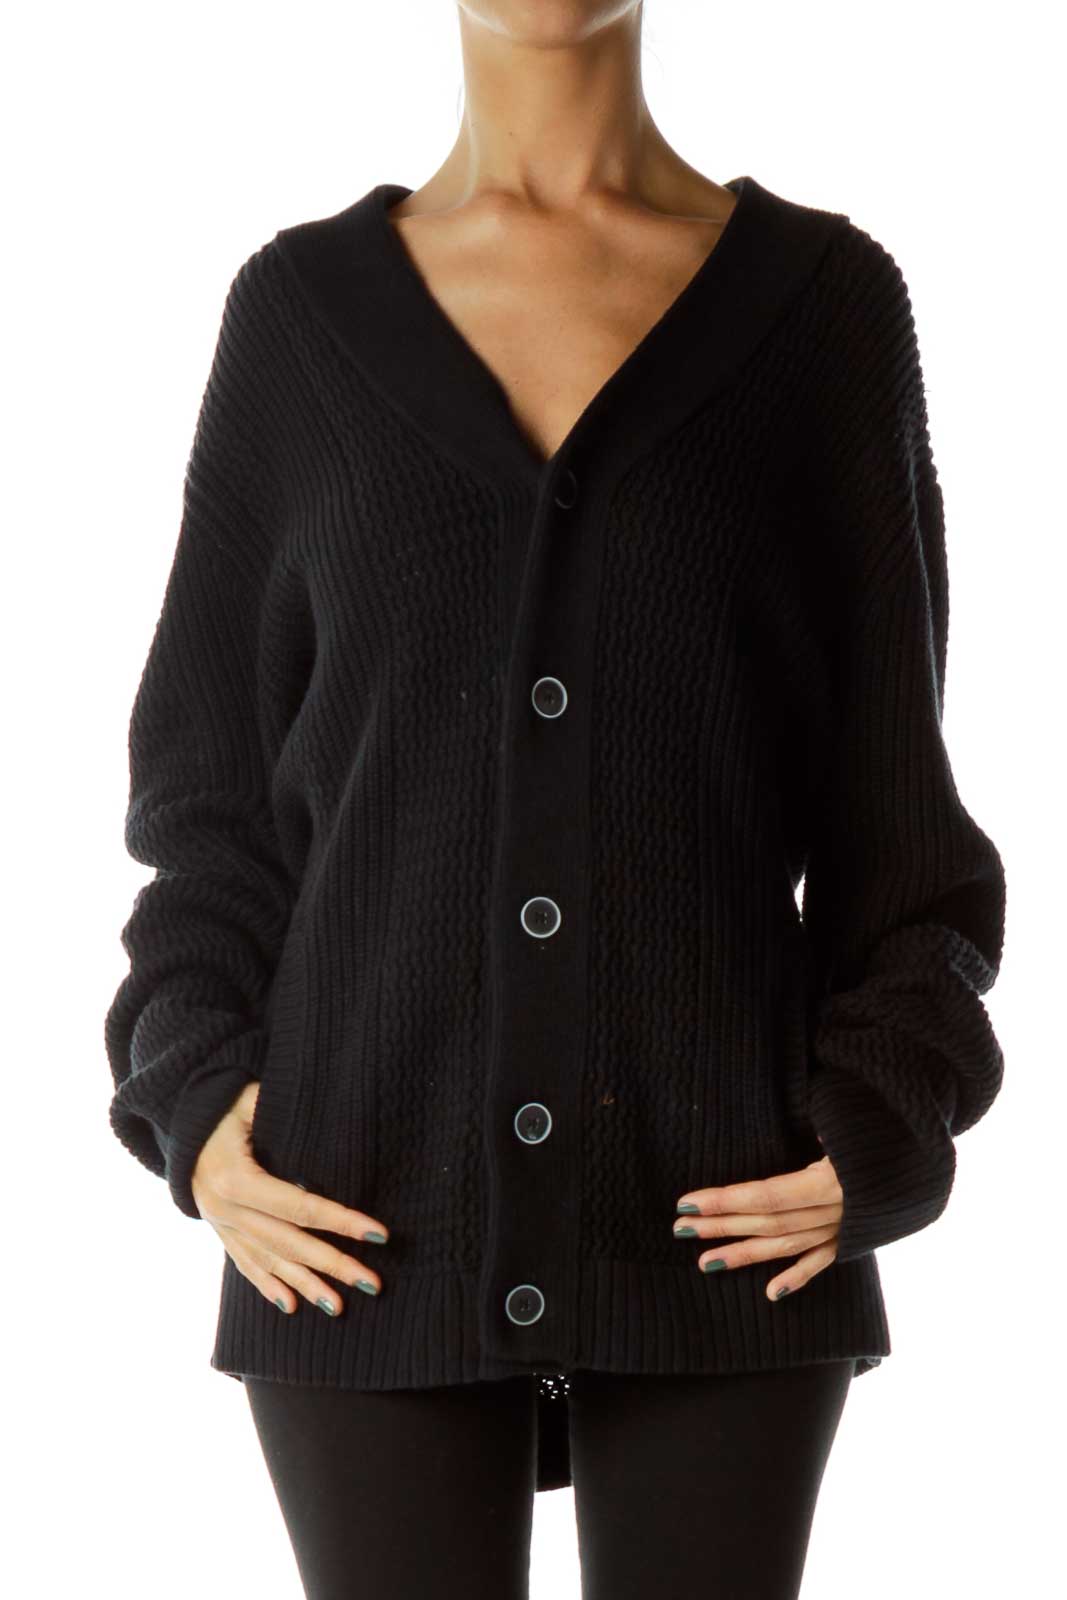 Black Knit Buttoned Cardigan Front